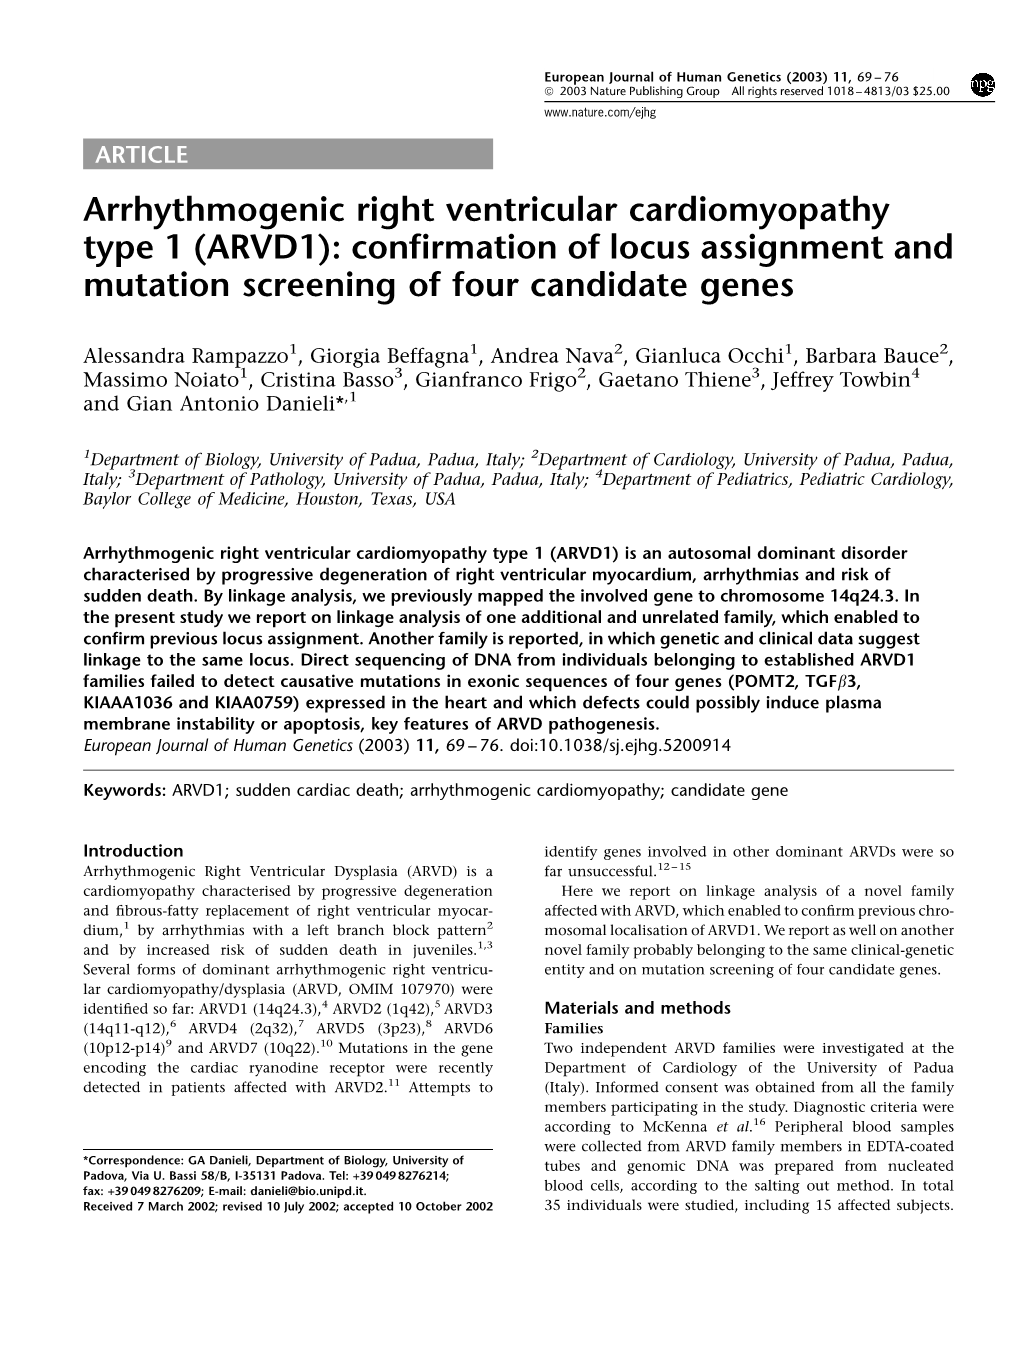 Arrhythmogenic Right Ventricular Cardiomyopathy Type 1 (ARVD1): Confirmation of Locus Assignment and Mutation Screening of Four